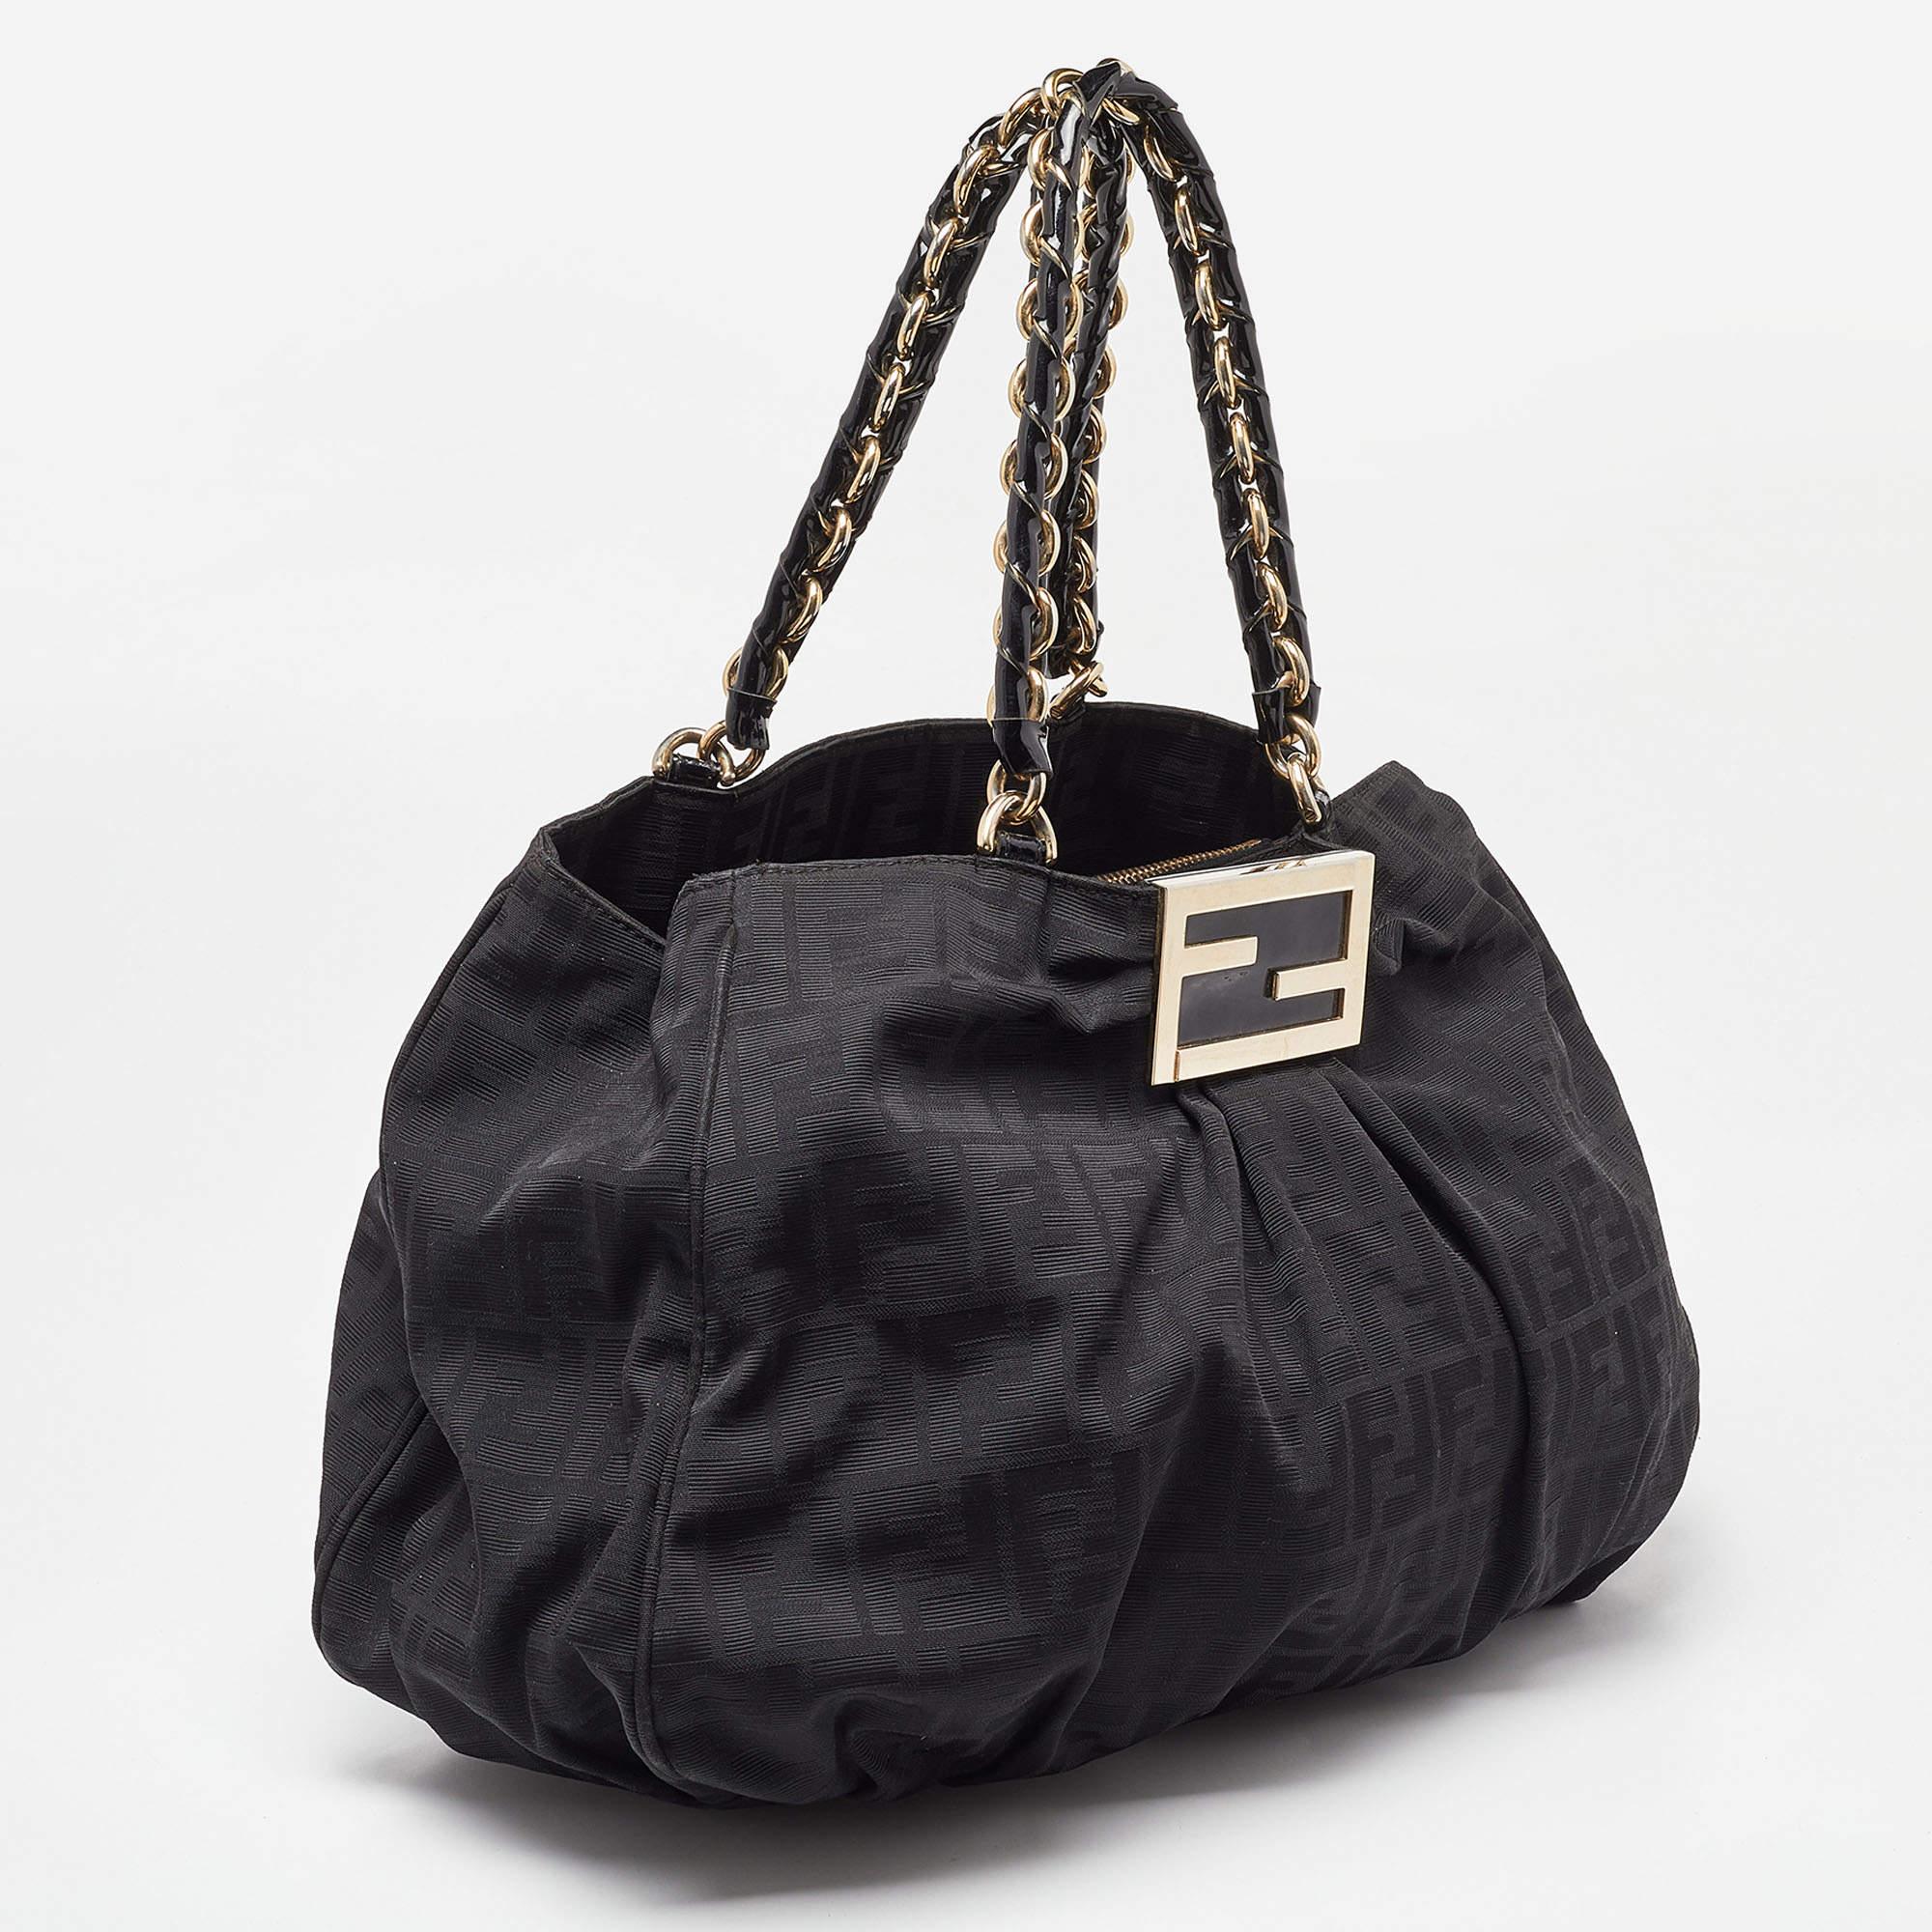 Complete a winning look with this Mia shoulder bag from Fendi. Crafted from Zucca canvas & patent leather, the front comes with a striking gold-tone FF logo, and the interior is sized to fit your everyday essentials.

